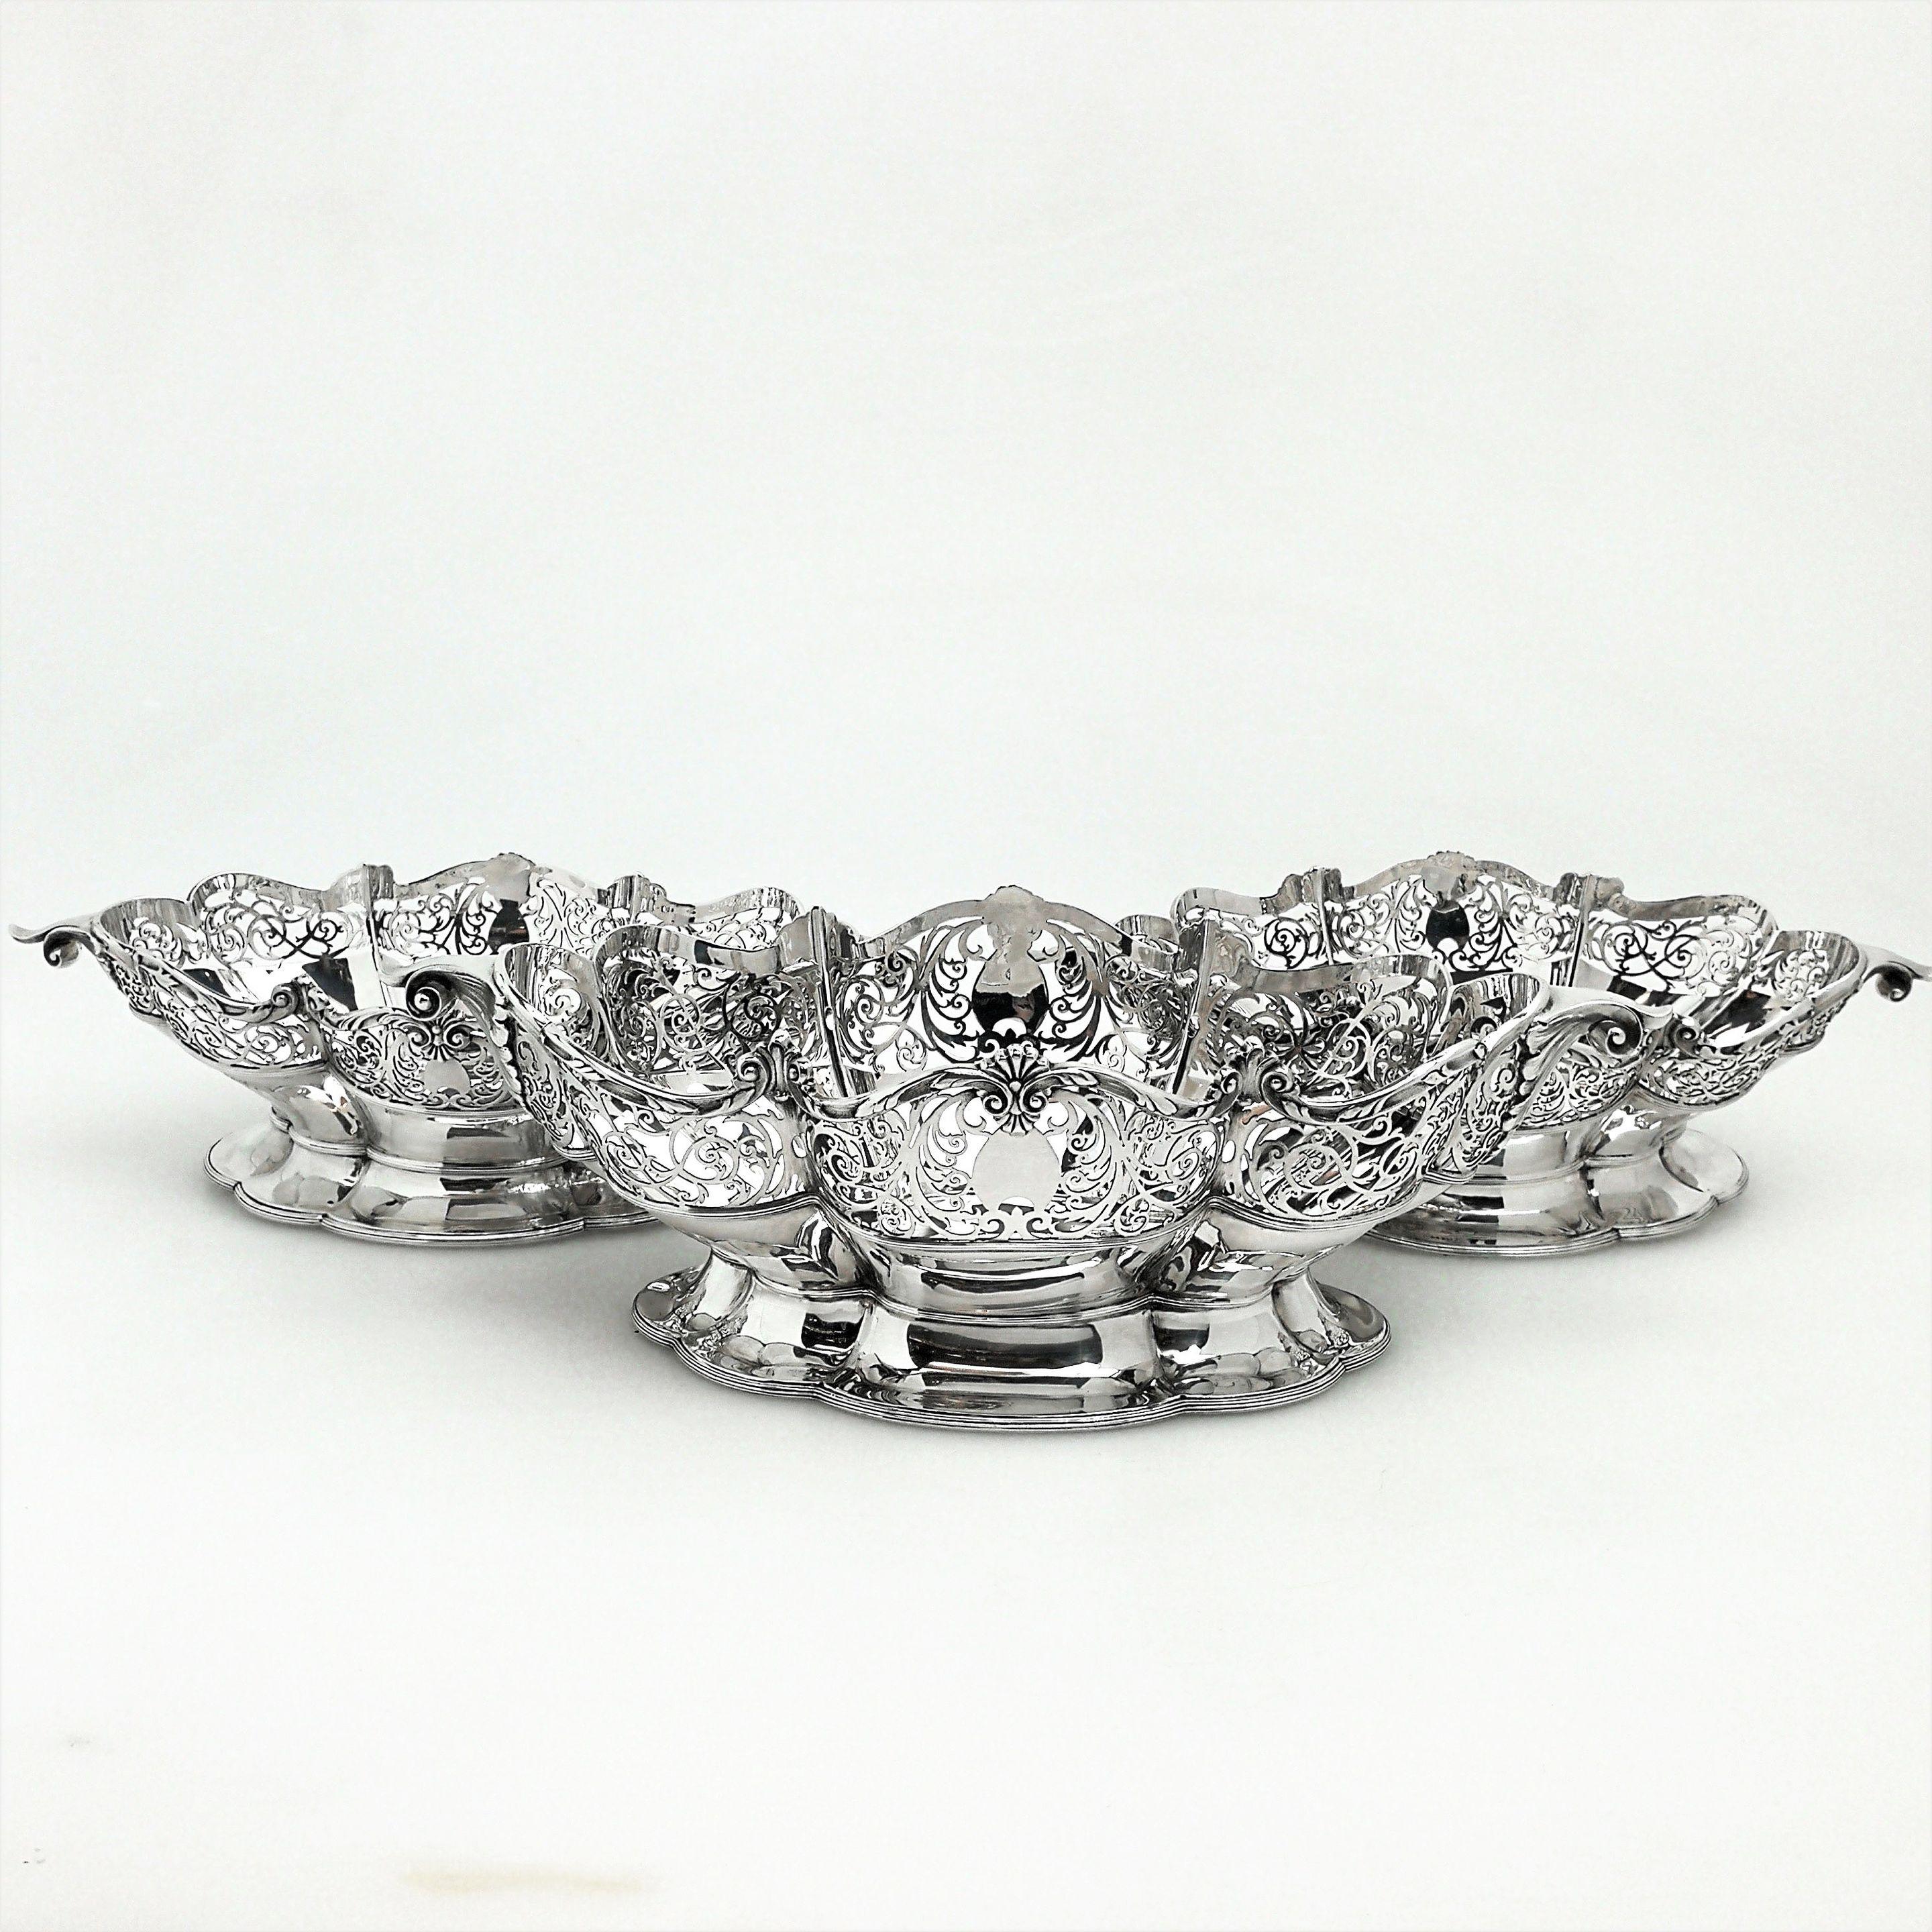 An elegant set of three solid silver baskets comprising of one large dish and a pair of smaller dishes. This set of three dishes features an delicate pierced scroll design around the rim of a shaped body. The rim has an applied band of scroll and